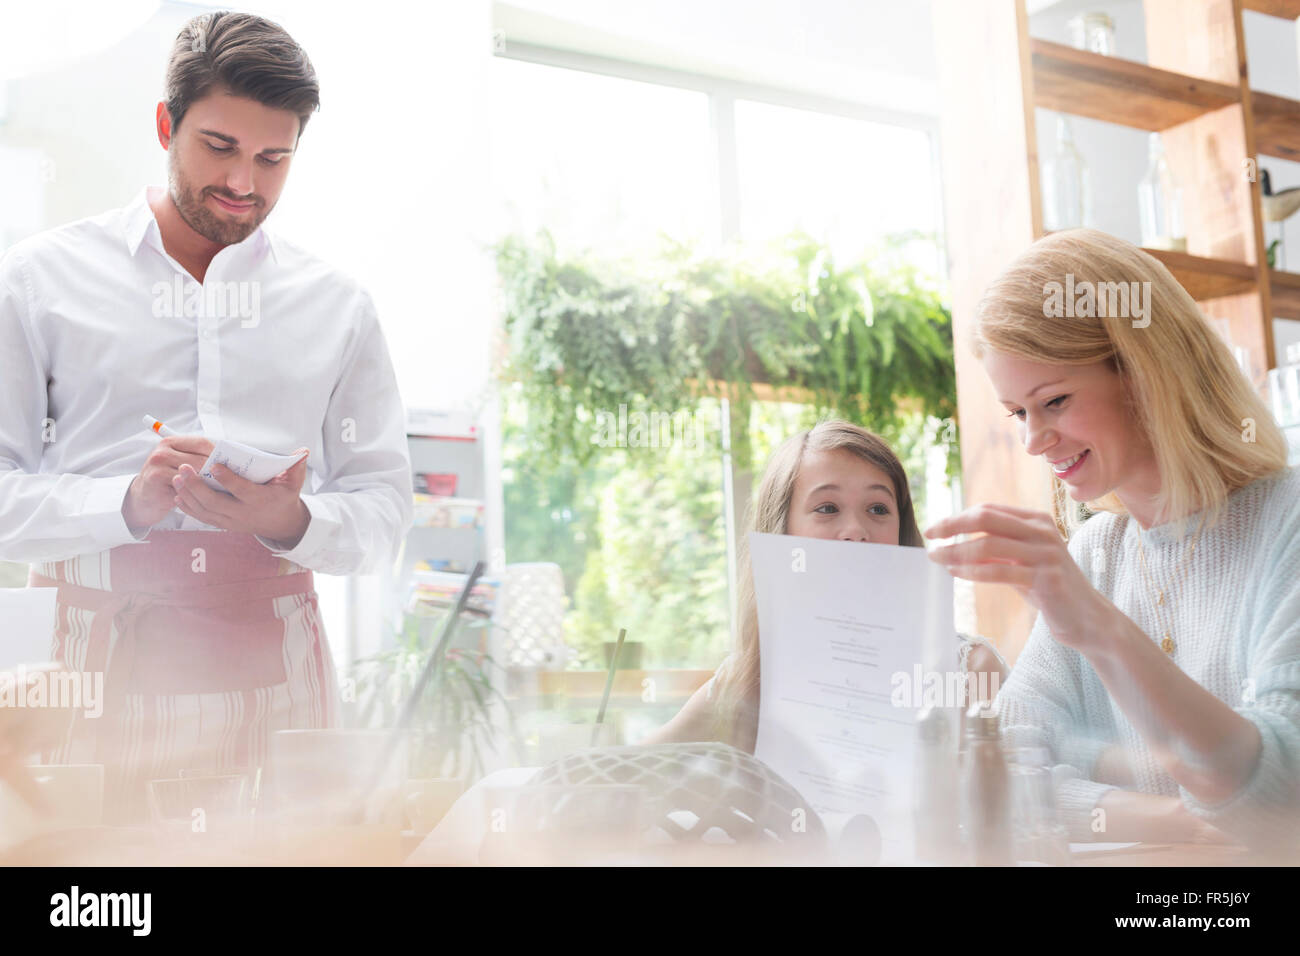 Waiter taking order from mother and daughter in cafe Stock Photo